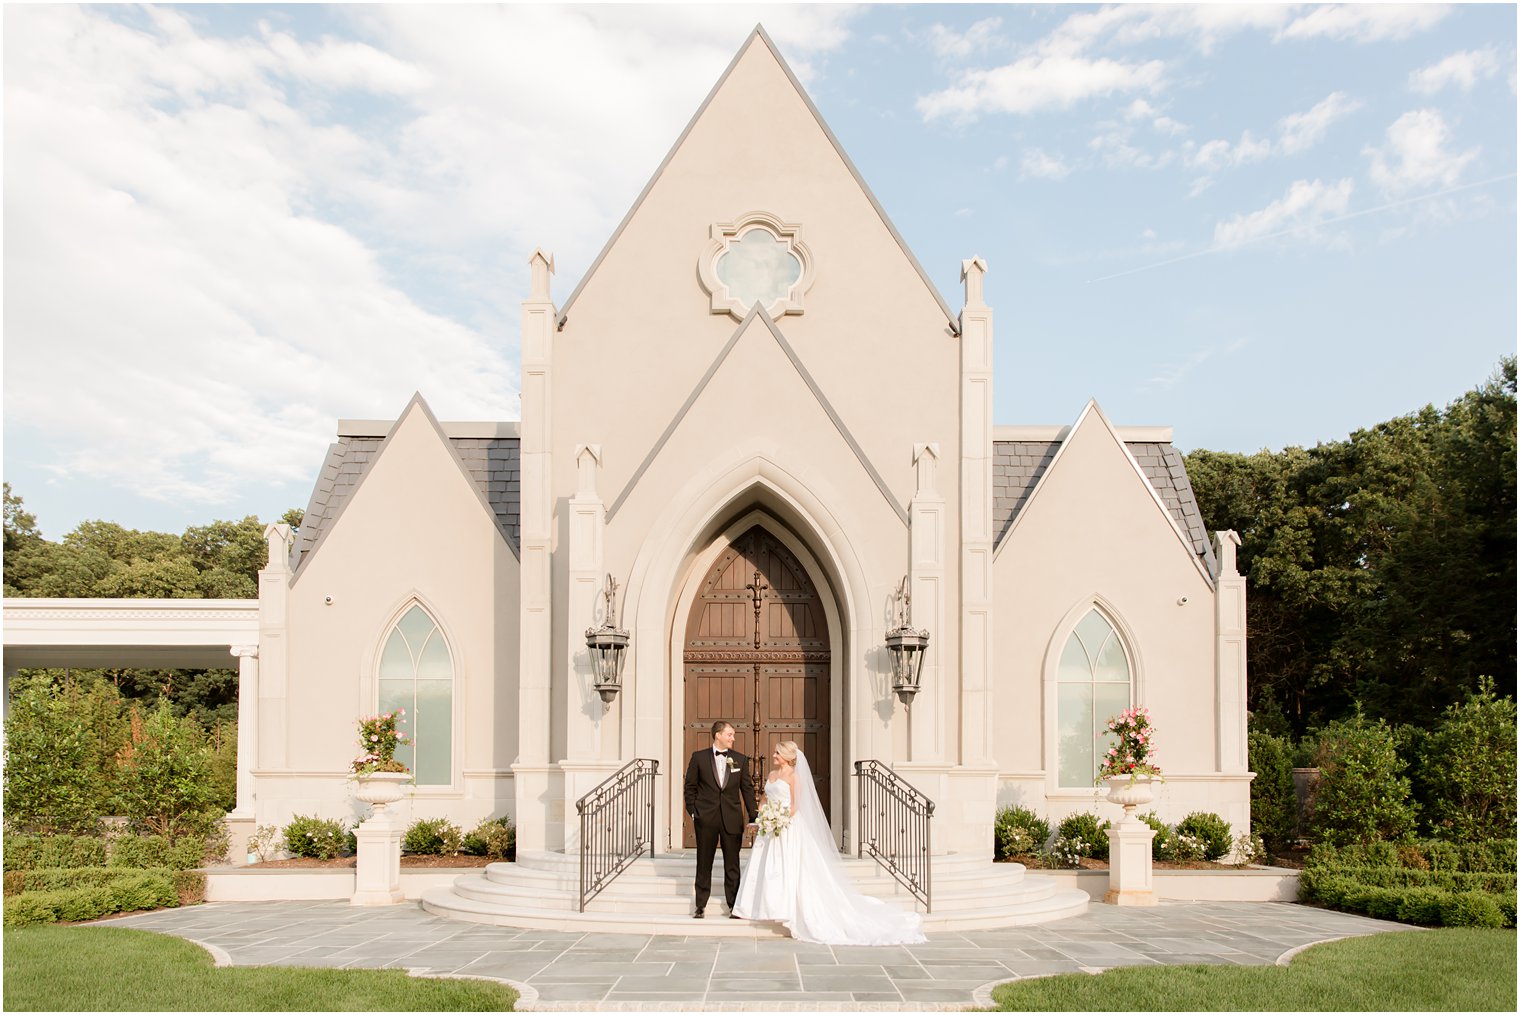 Couple posing for a photo in front of Park Chateau Chapel